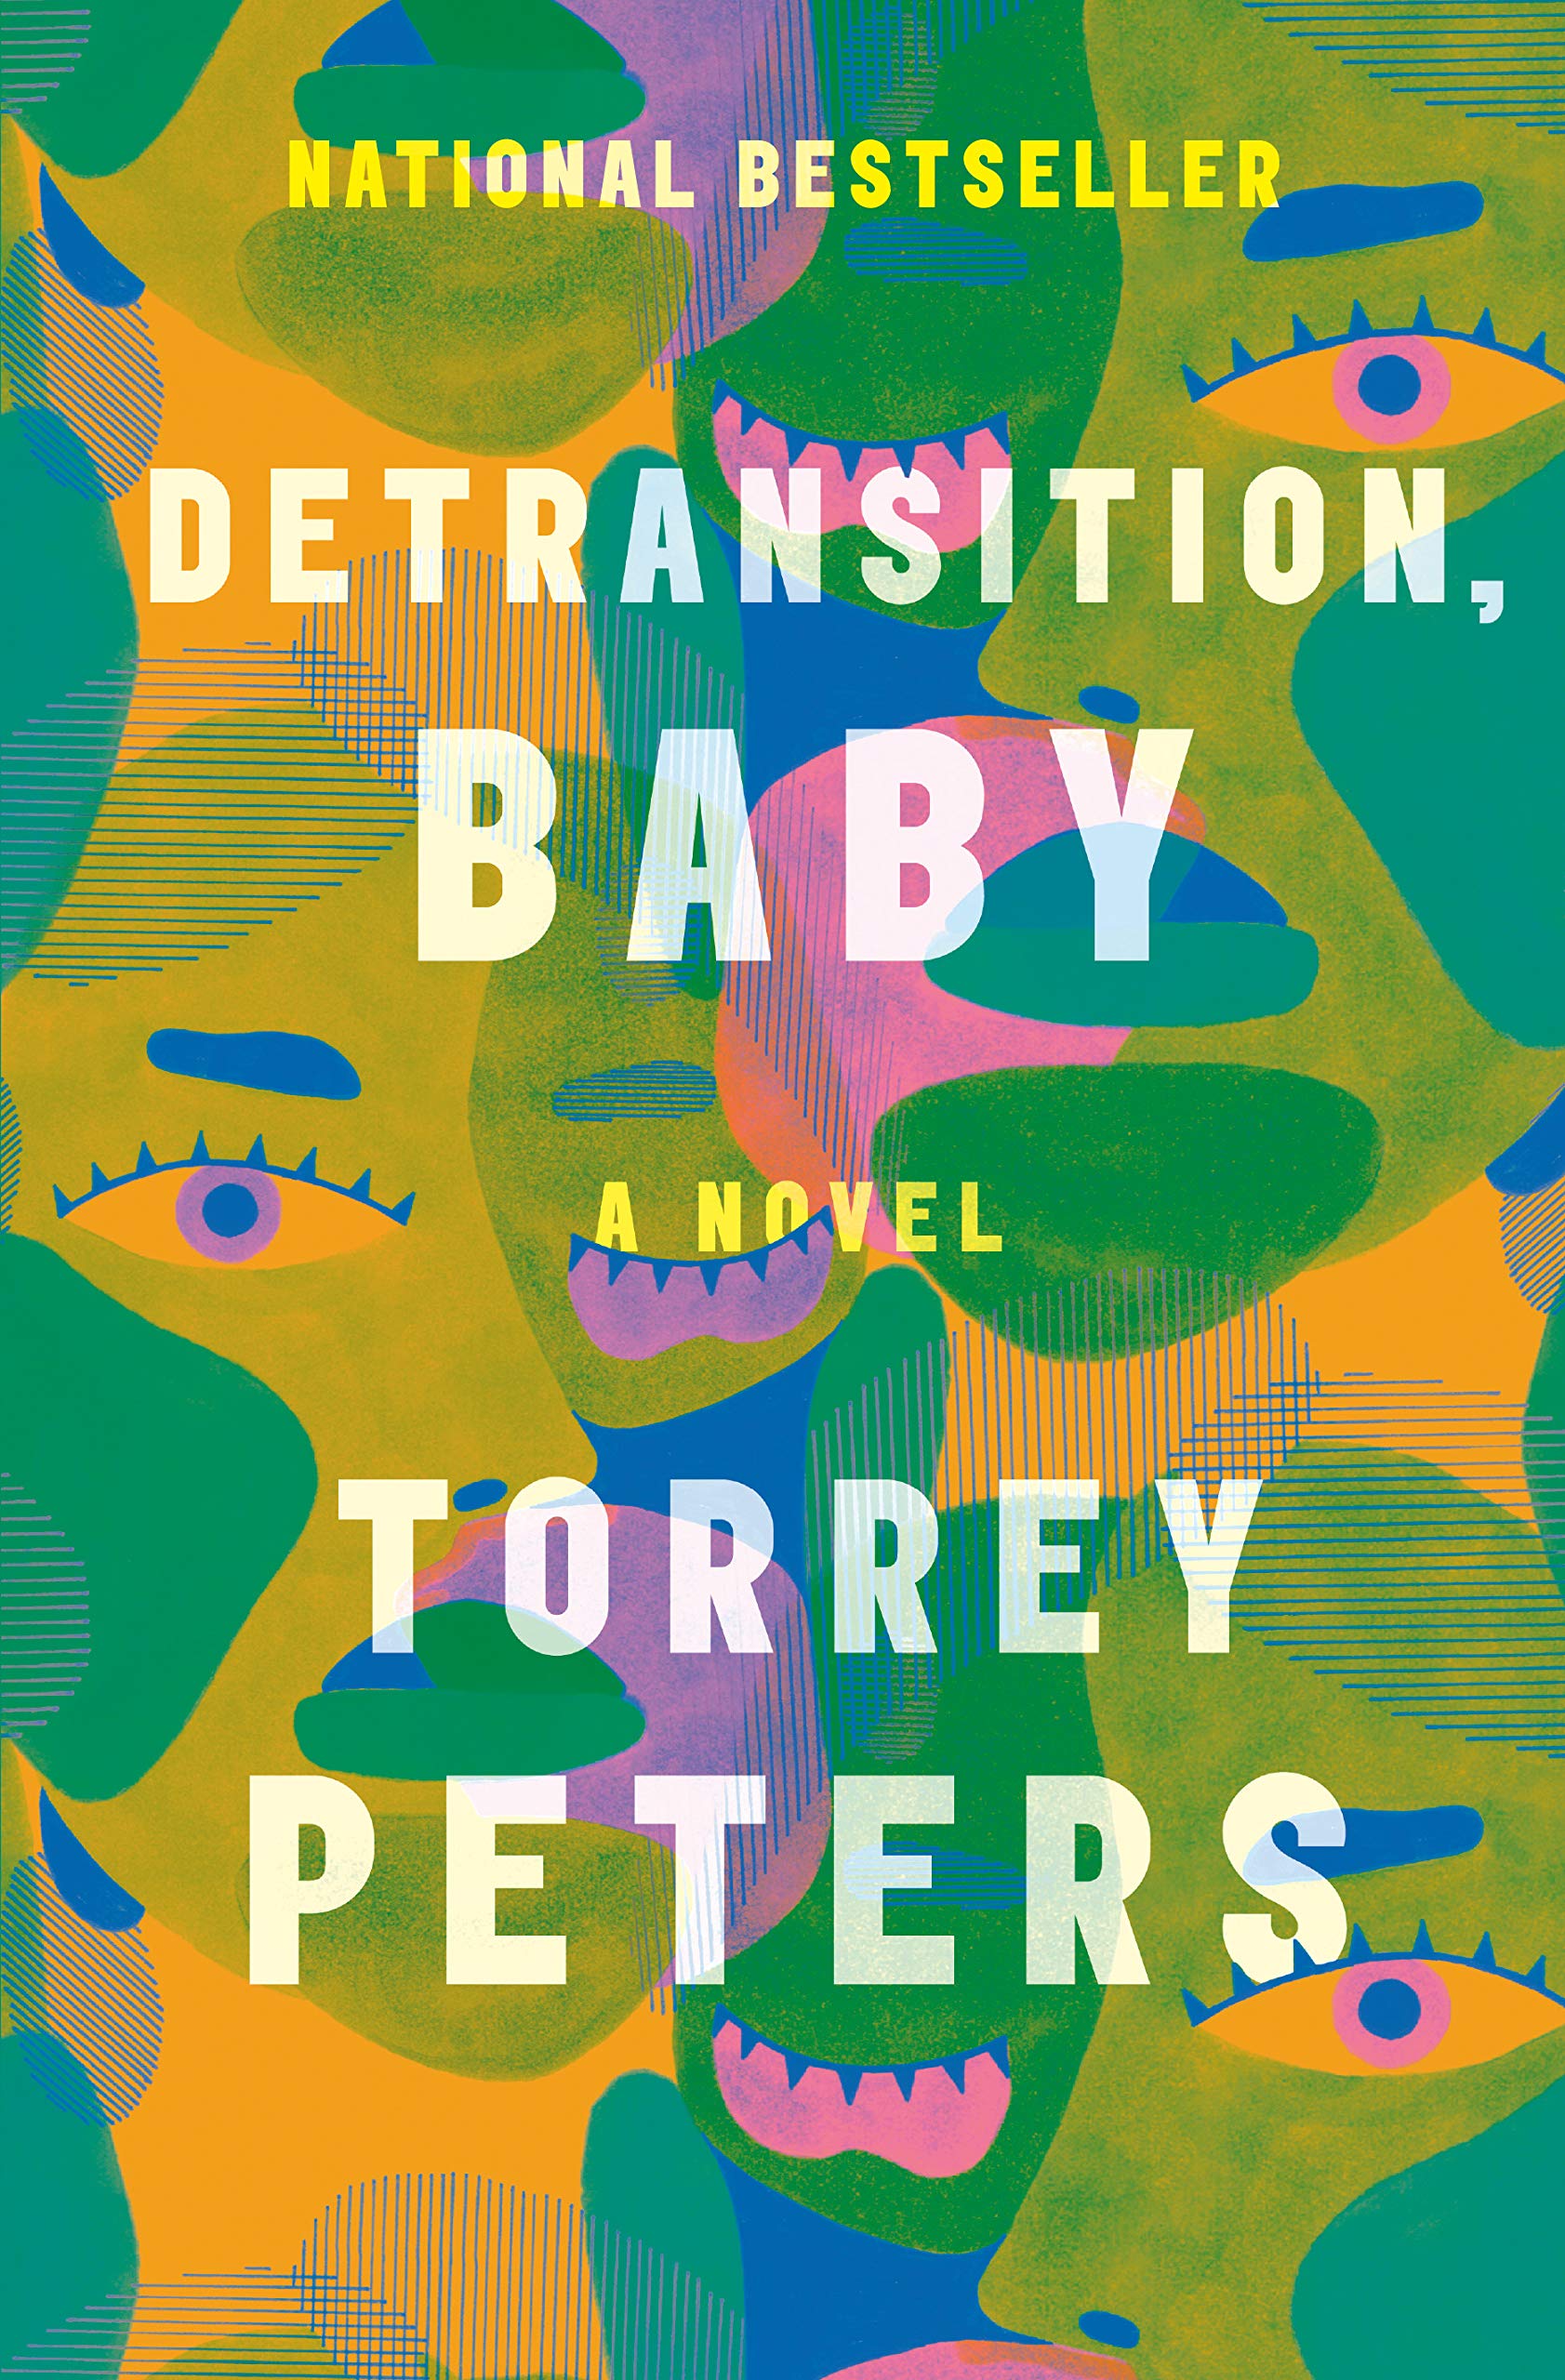 The cover of Detransition, Baby